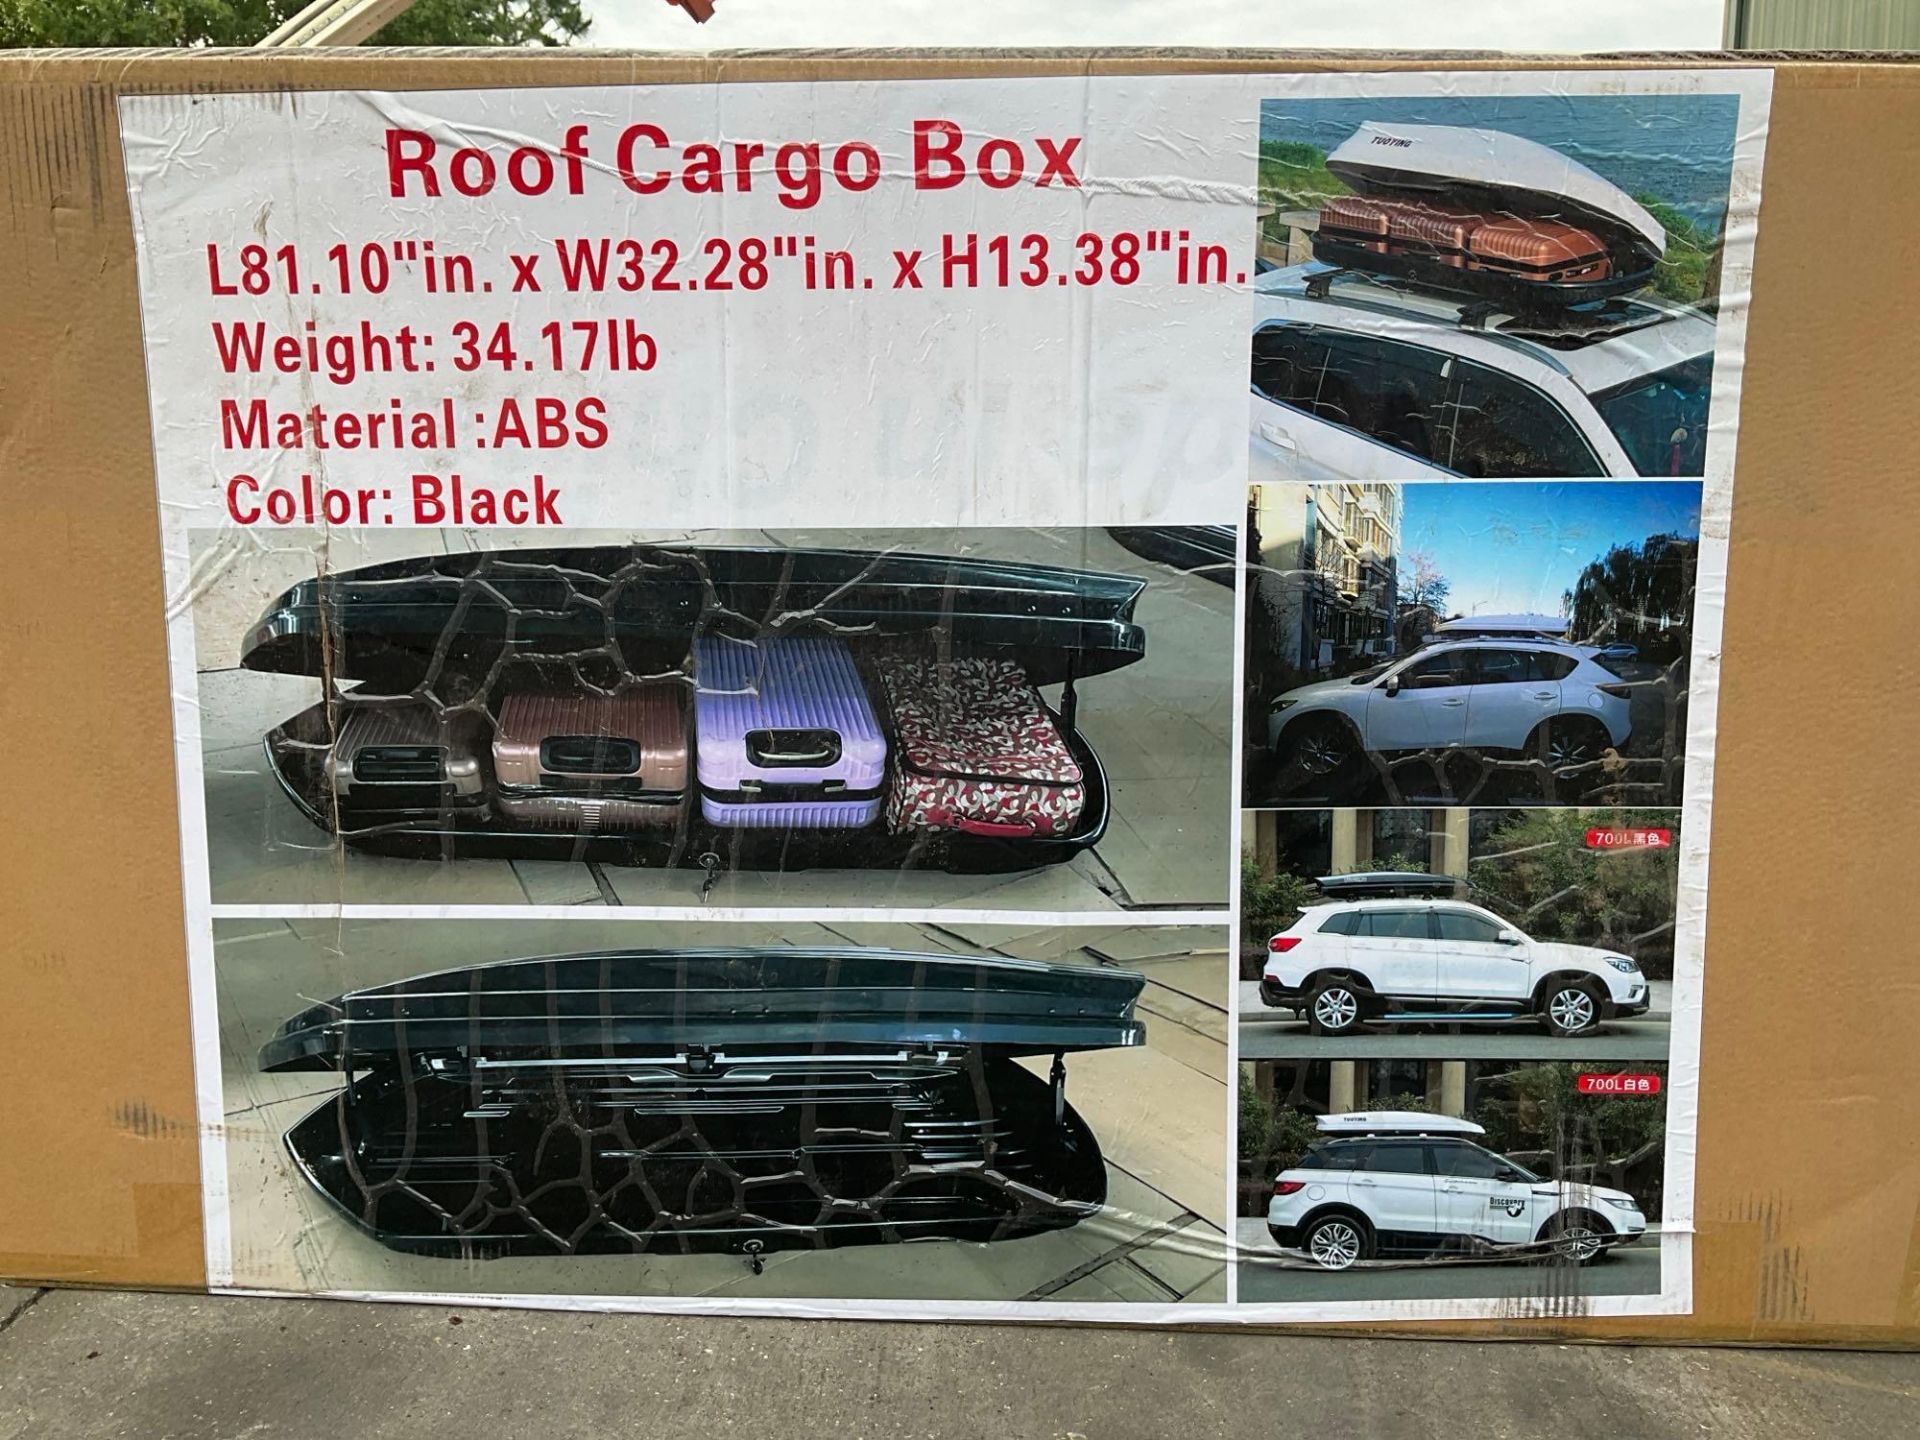 UNUSED ROOF CARGO BOX, APPROX 81.10" L x 32.28" W X 13.38" T, APPROX 1 IN BOX - Image 6 of 6